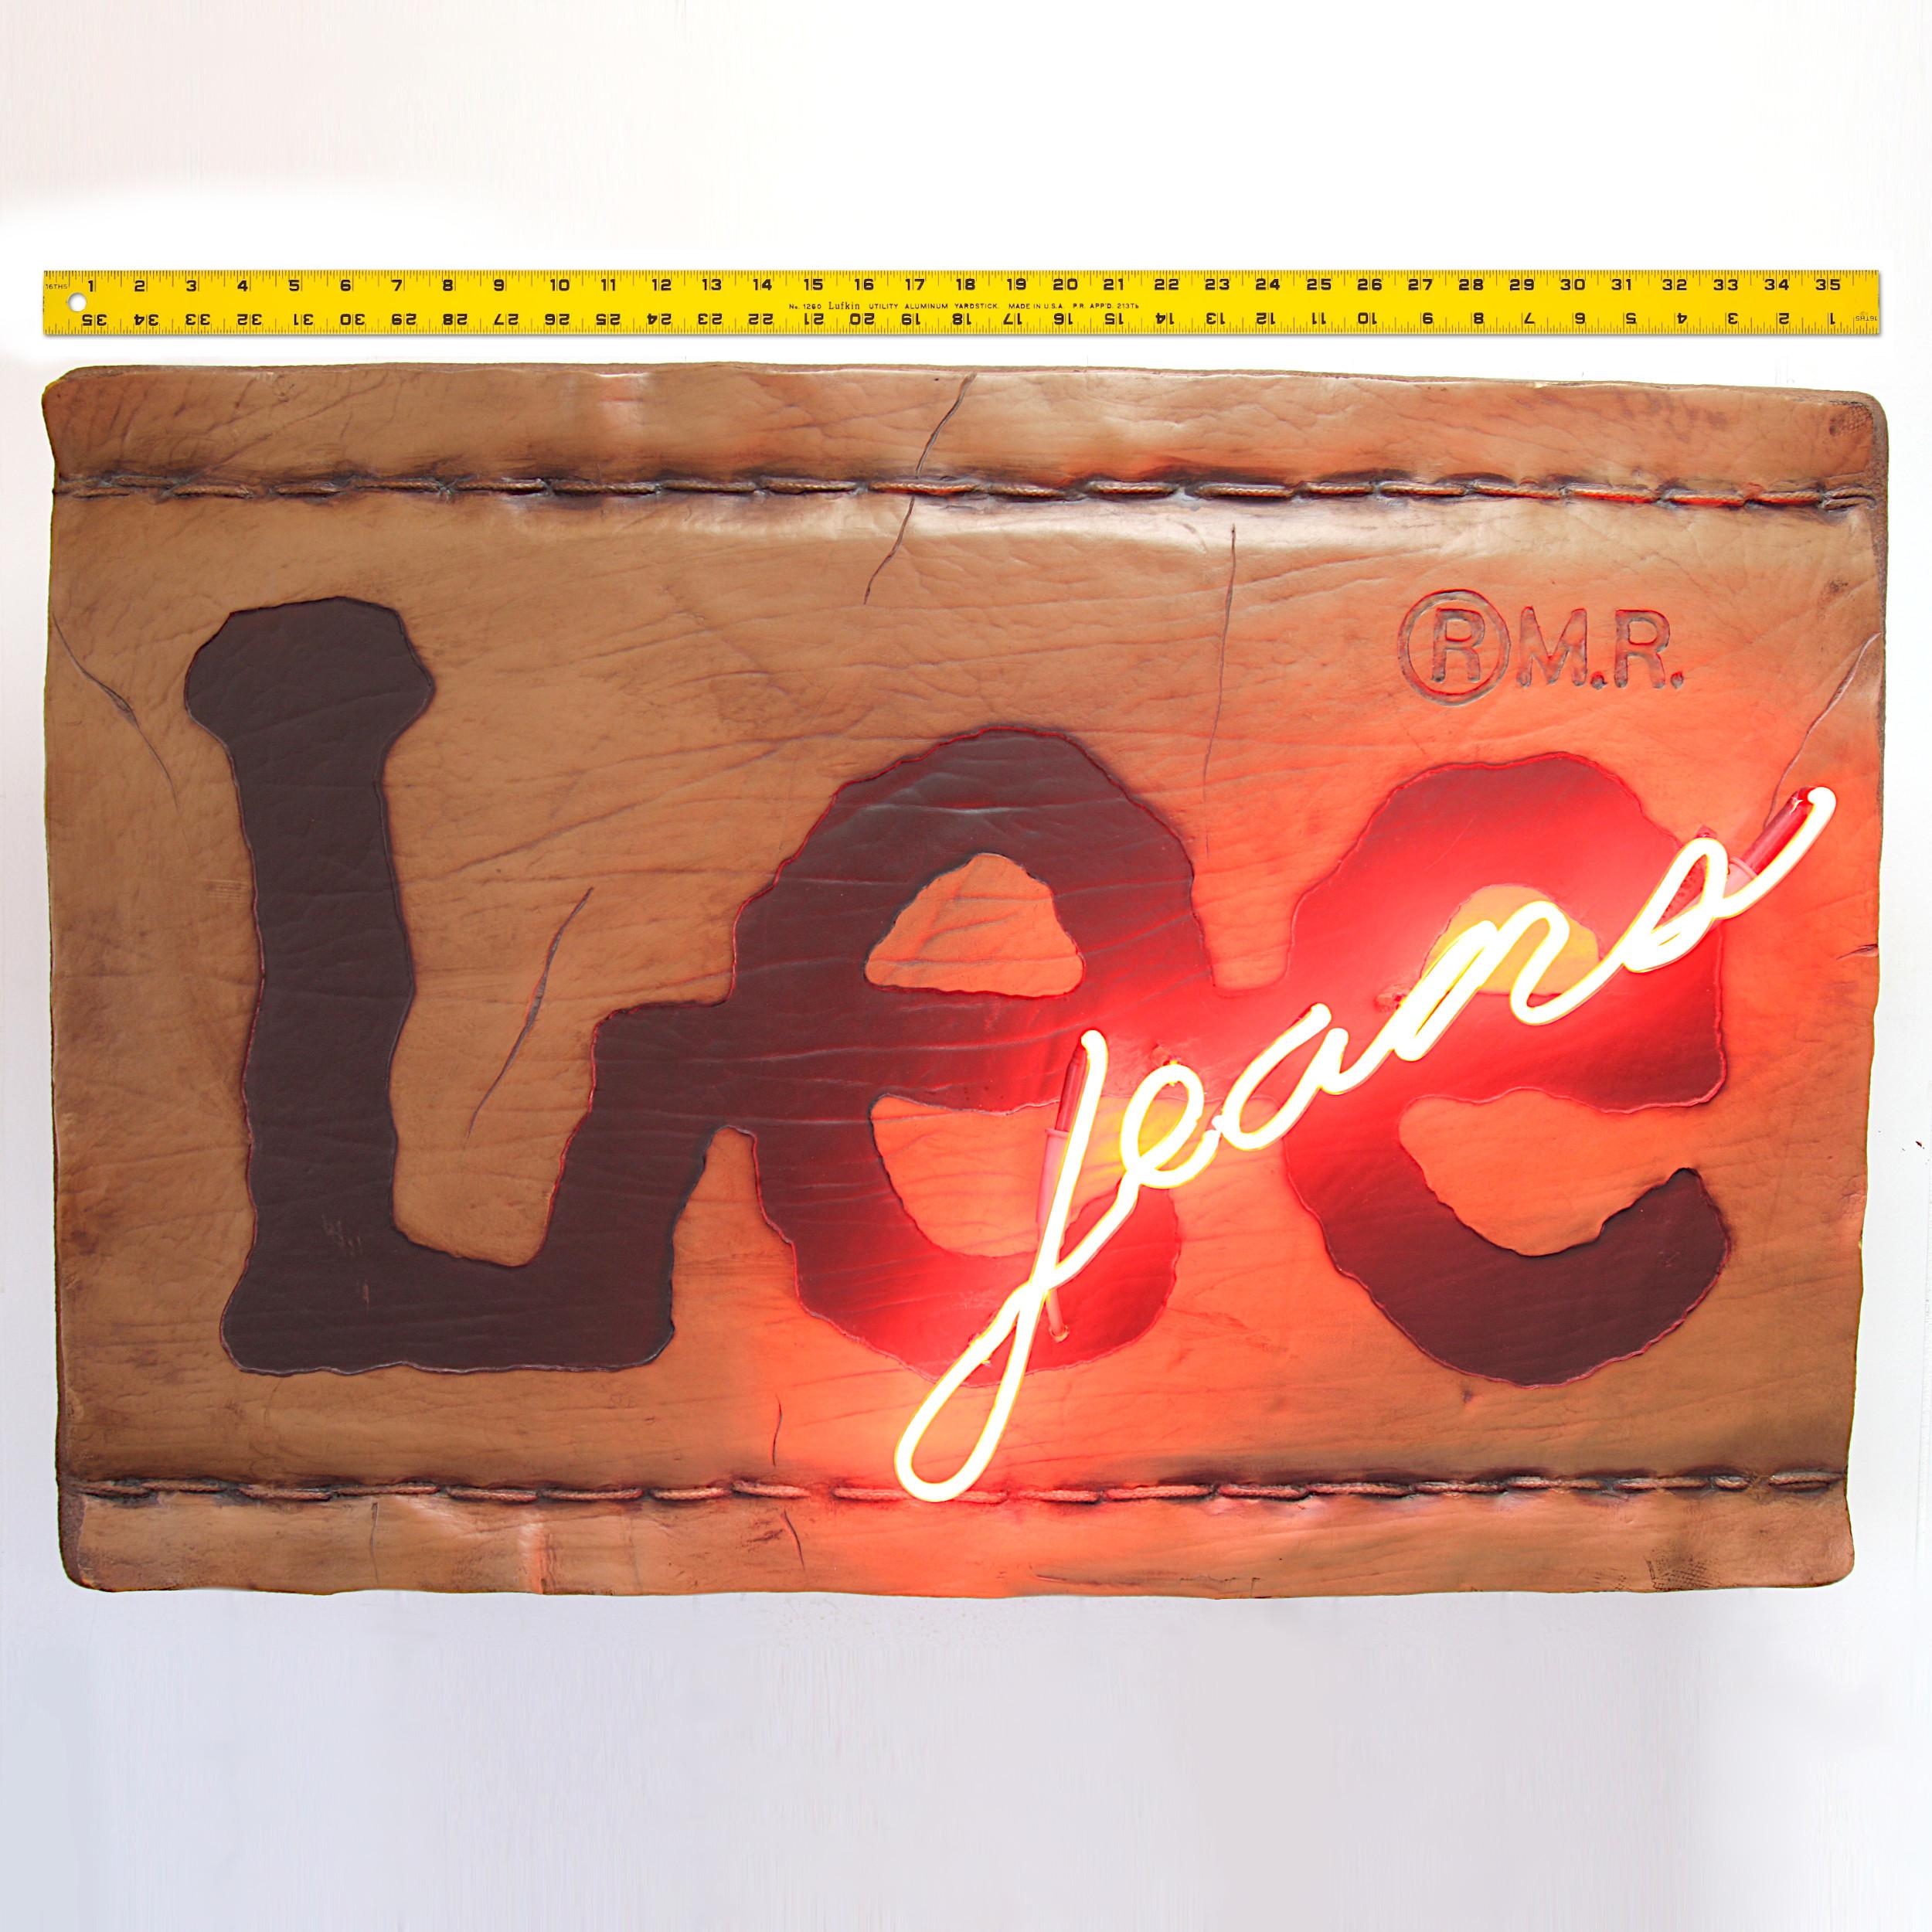 American Rare 1980s Vintage Lee Jeans Commercial Dealer Leather Tag Neon Sign